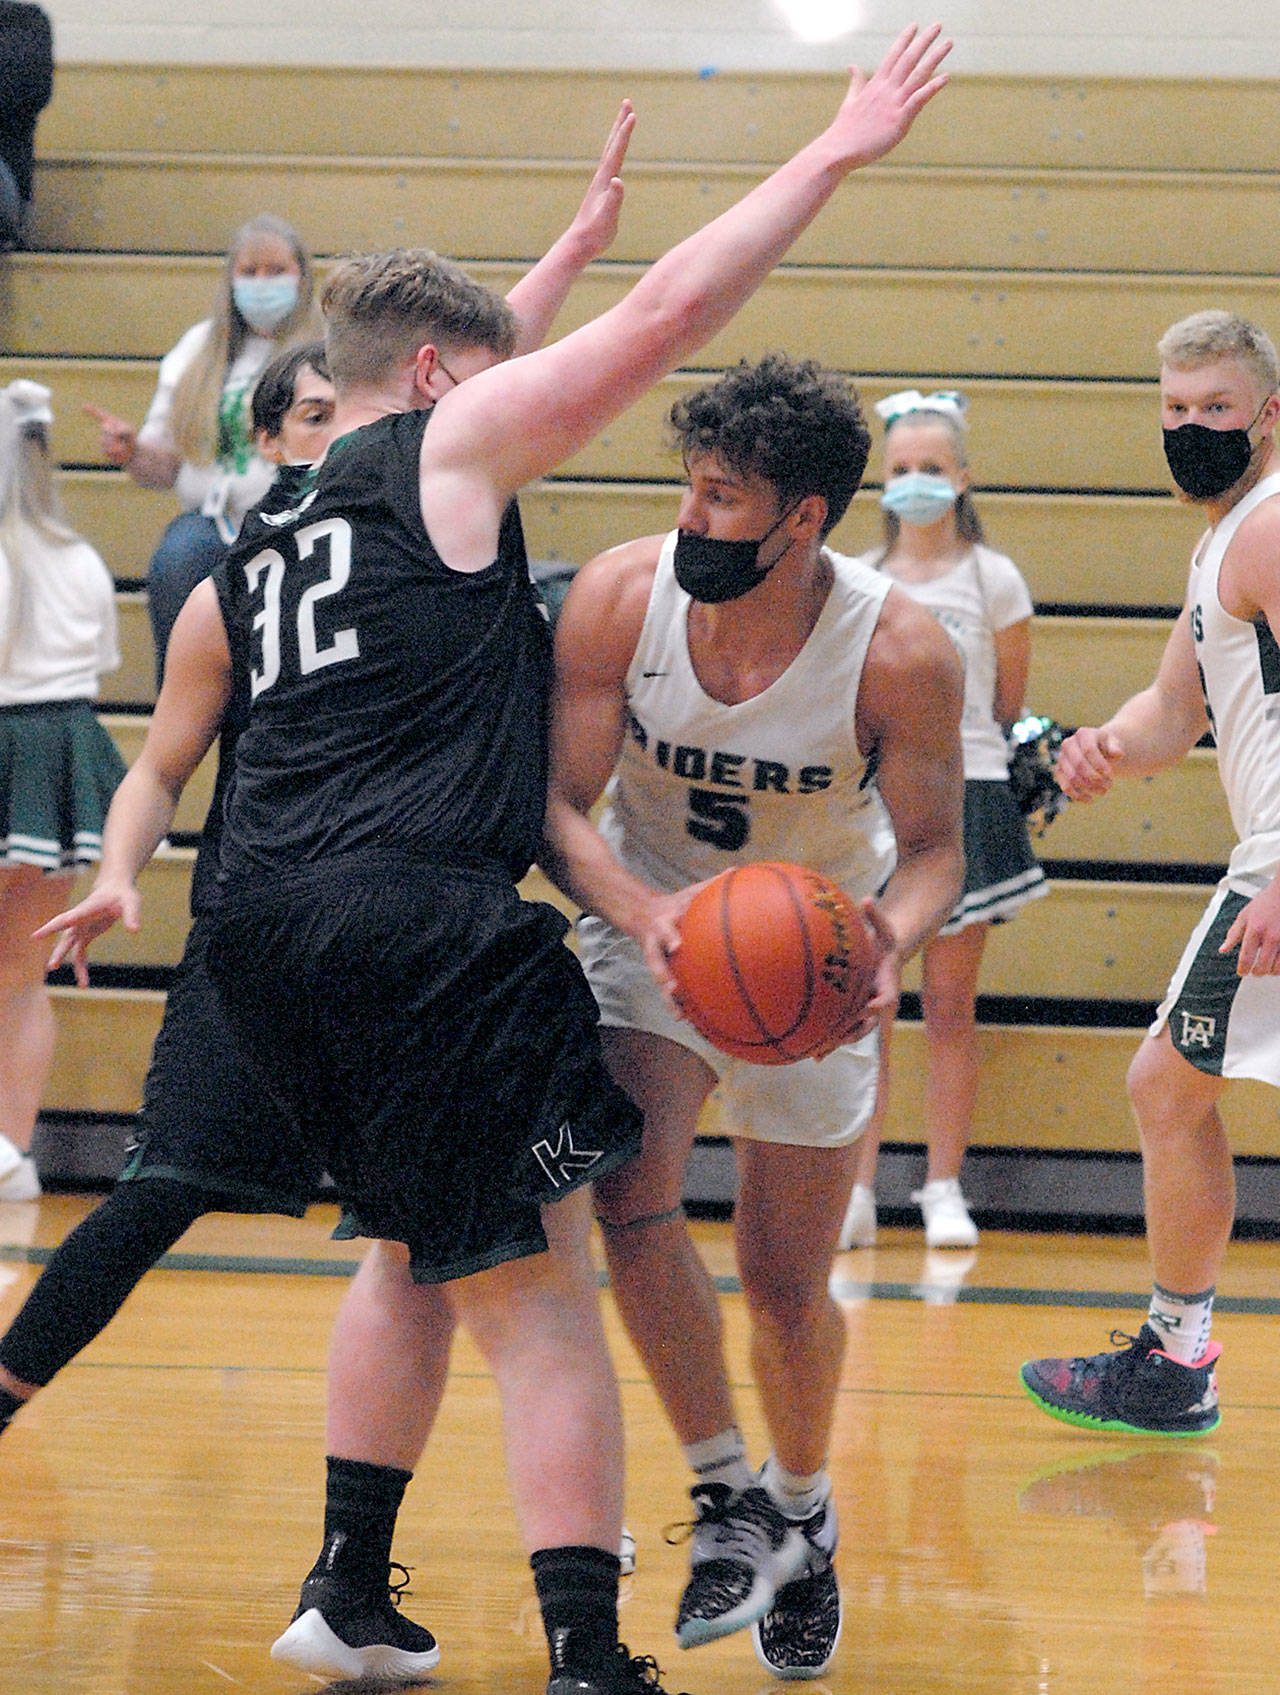 Keith Thorpe/Peninsula Daily News Port Angeles’ Chase Cobb, center, looks for a way around the defense of Klahowya’s Cannon Leifeste, left, as Cobb’s teammate, Adam Watkins, right, looks on during Thursday’s game at Port Angeles High School.